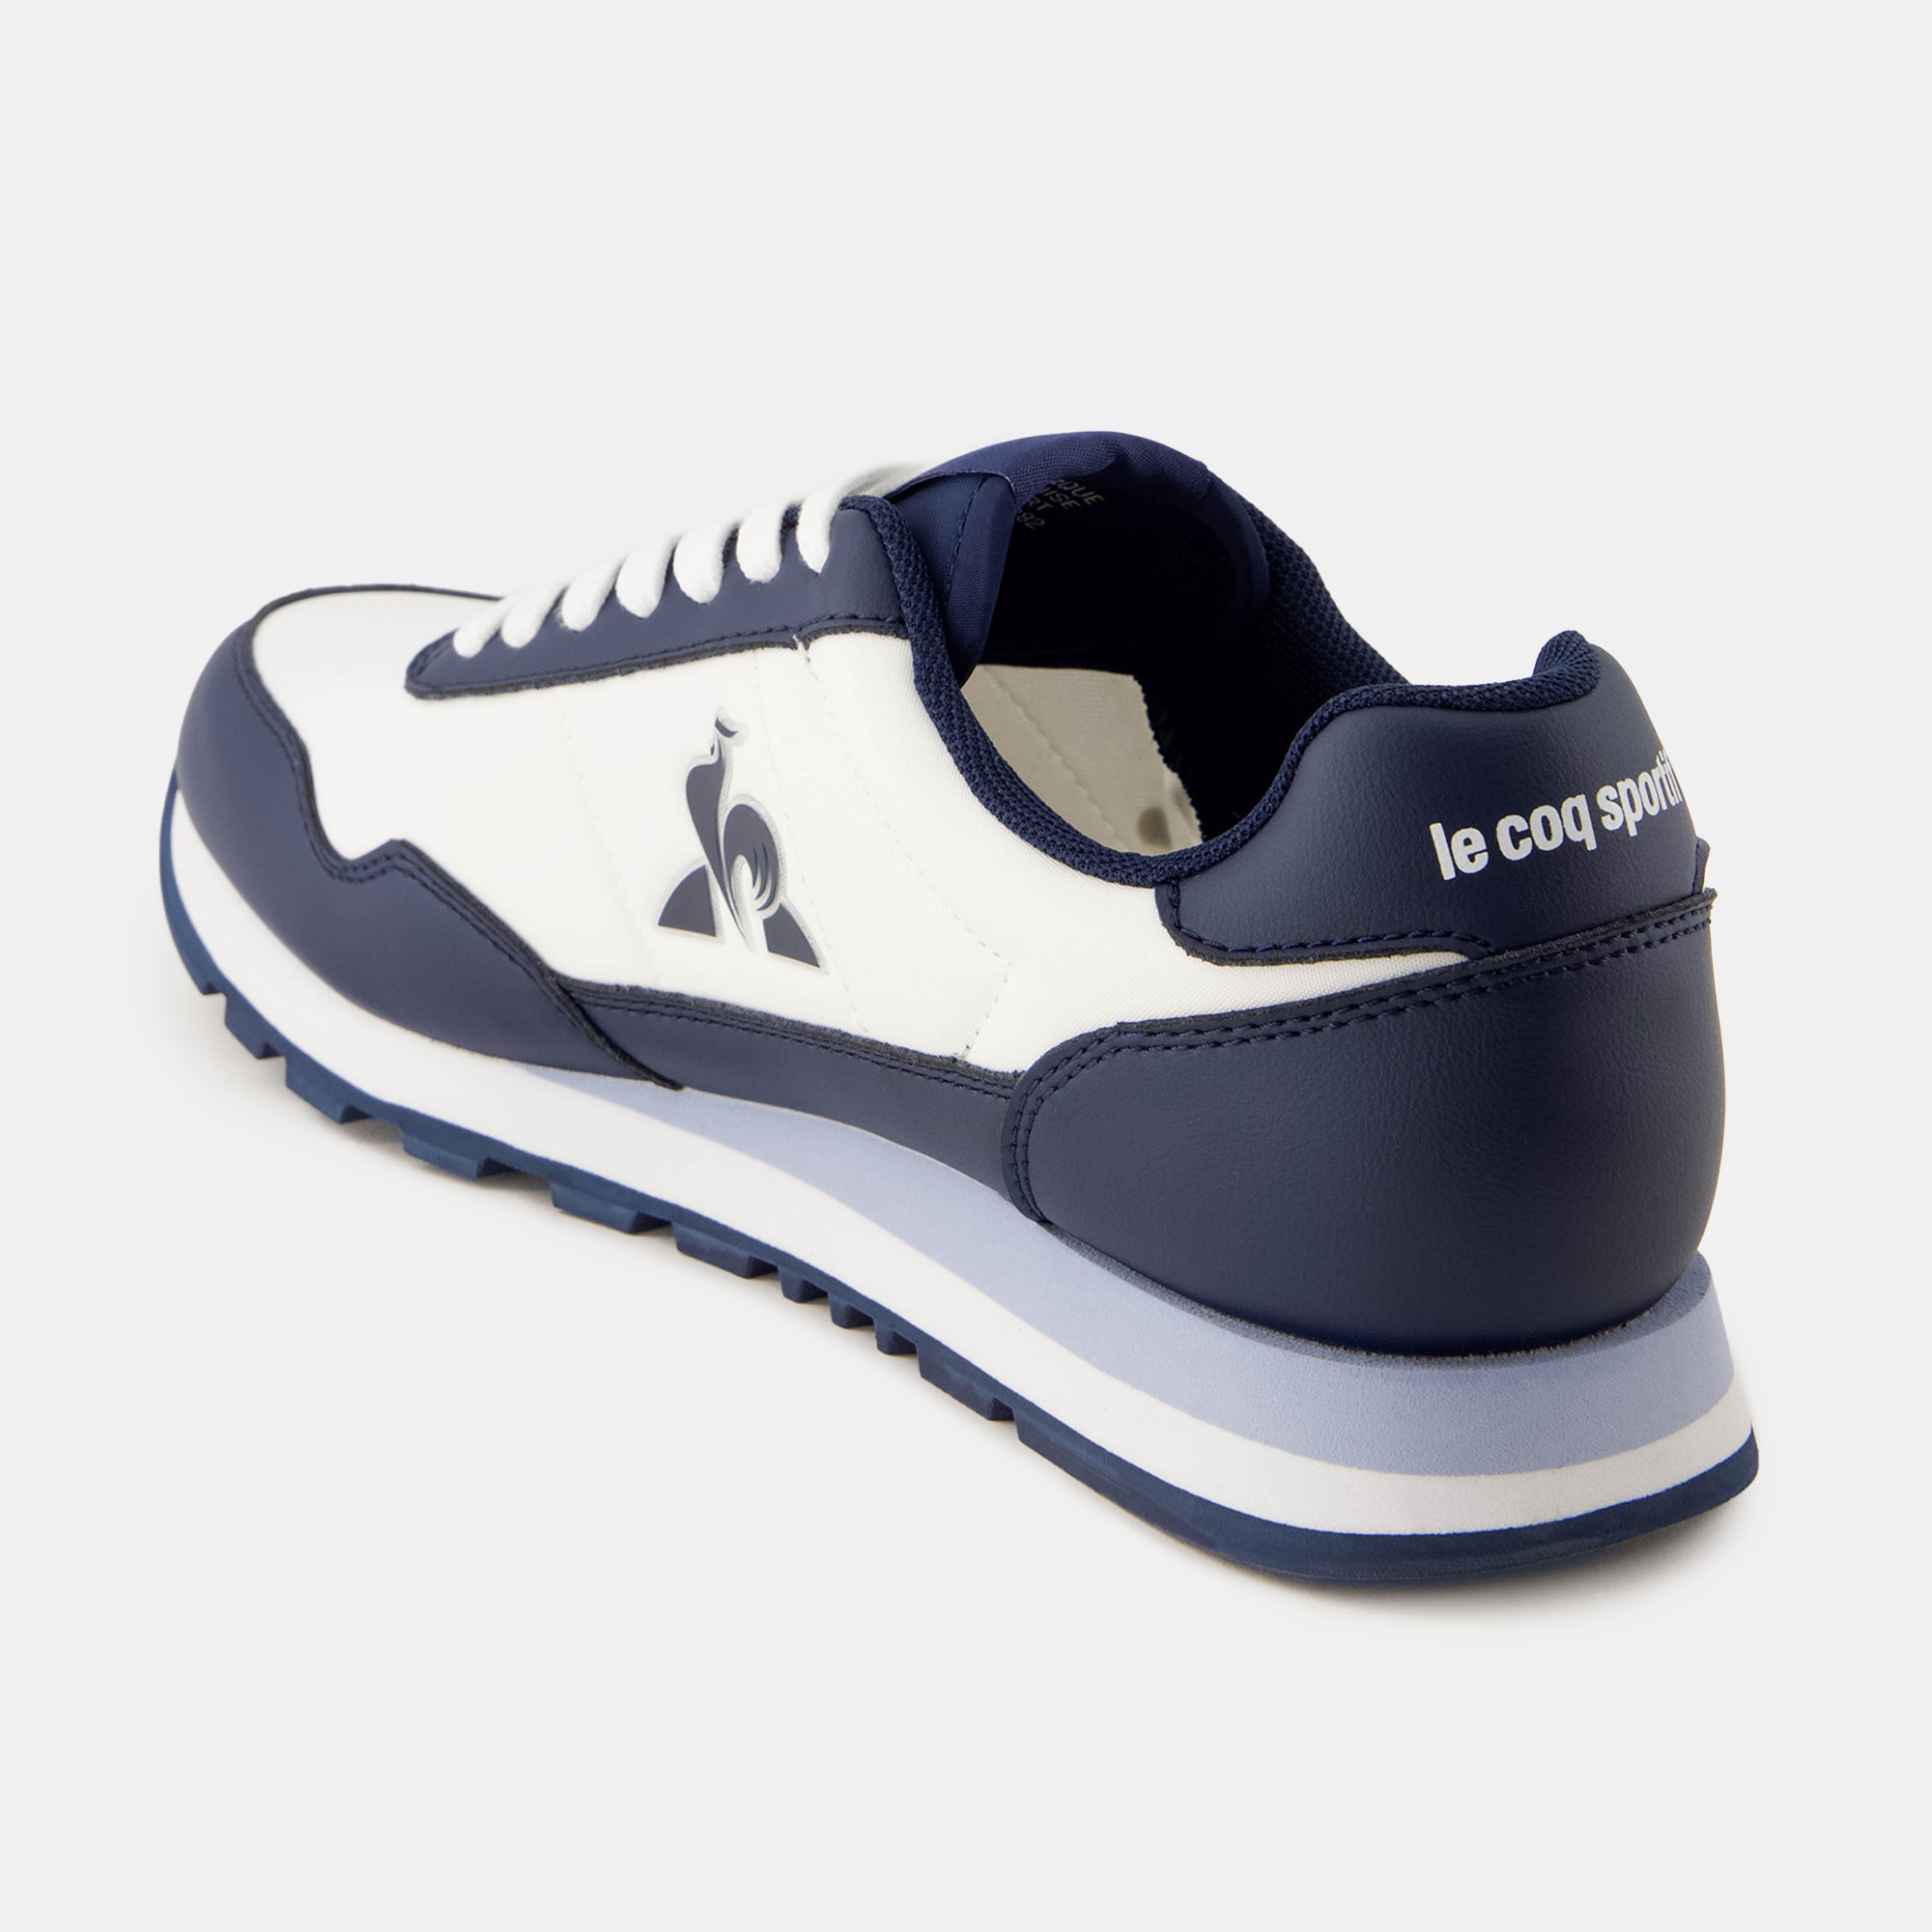 2410501-ASTRA_2 optical white/dress blue | Chaussures ASTRA_2 Homme